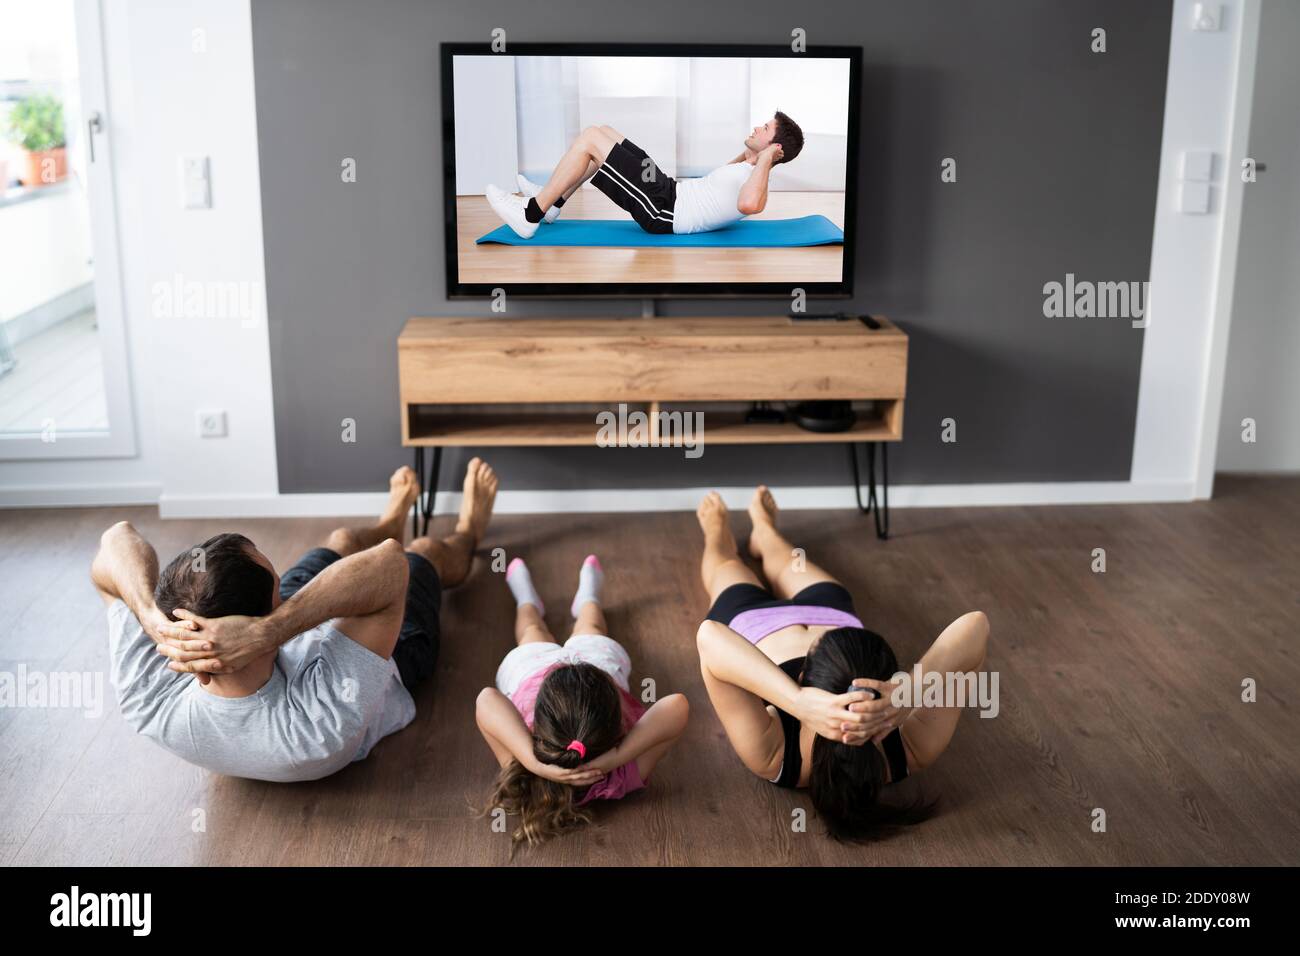 Family Family Doing Fitness Exercise While Watching TV Stock Photo